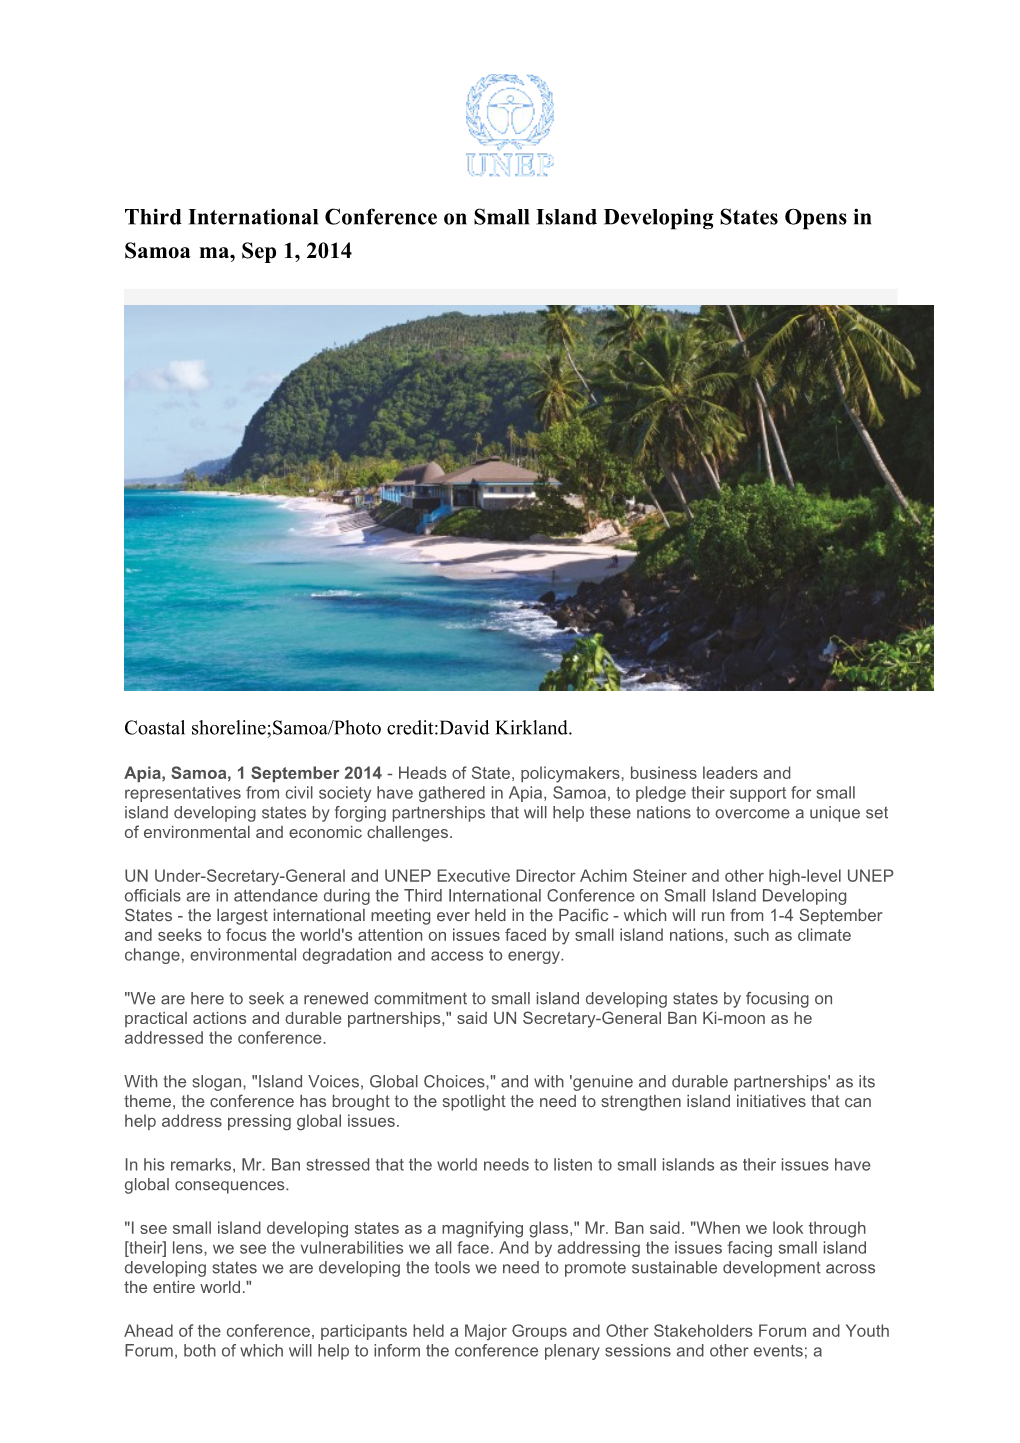 Third International Conference on Small Island Developing States Opens in Samoama, Sep 1, 2014